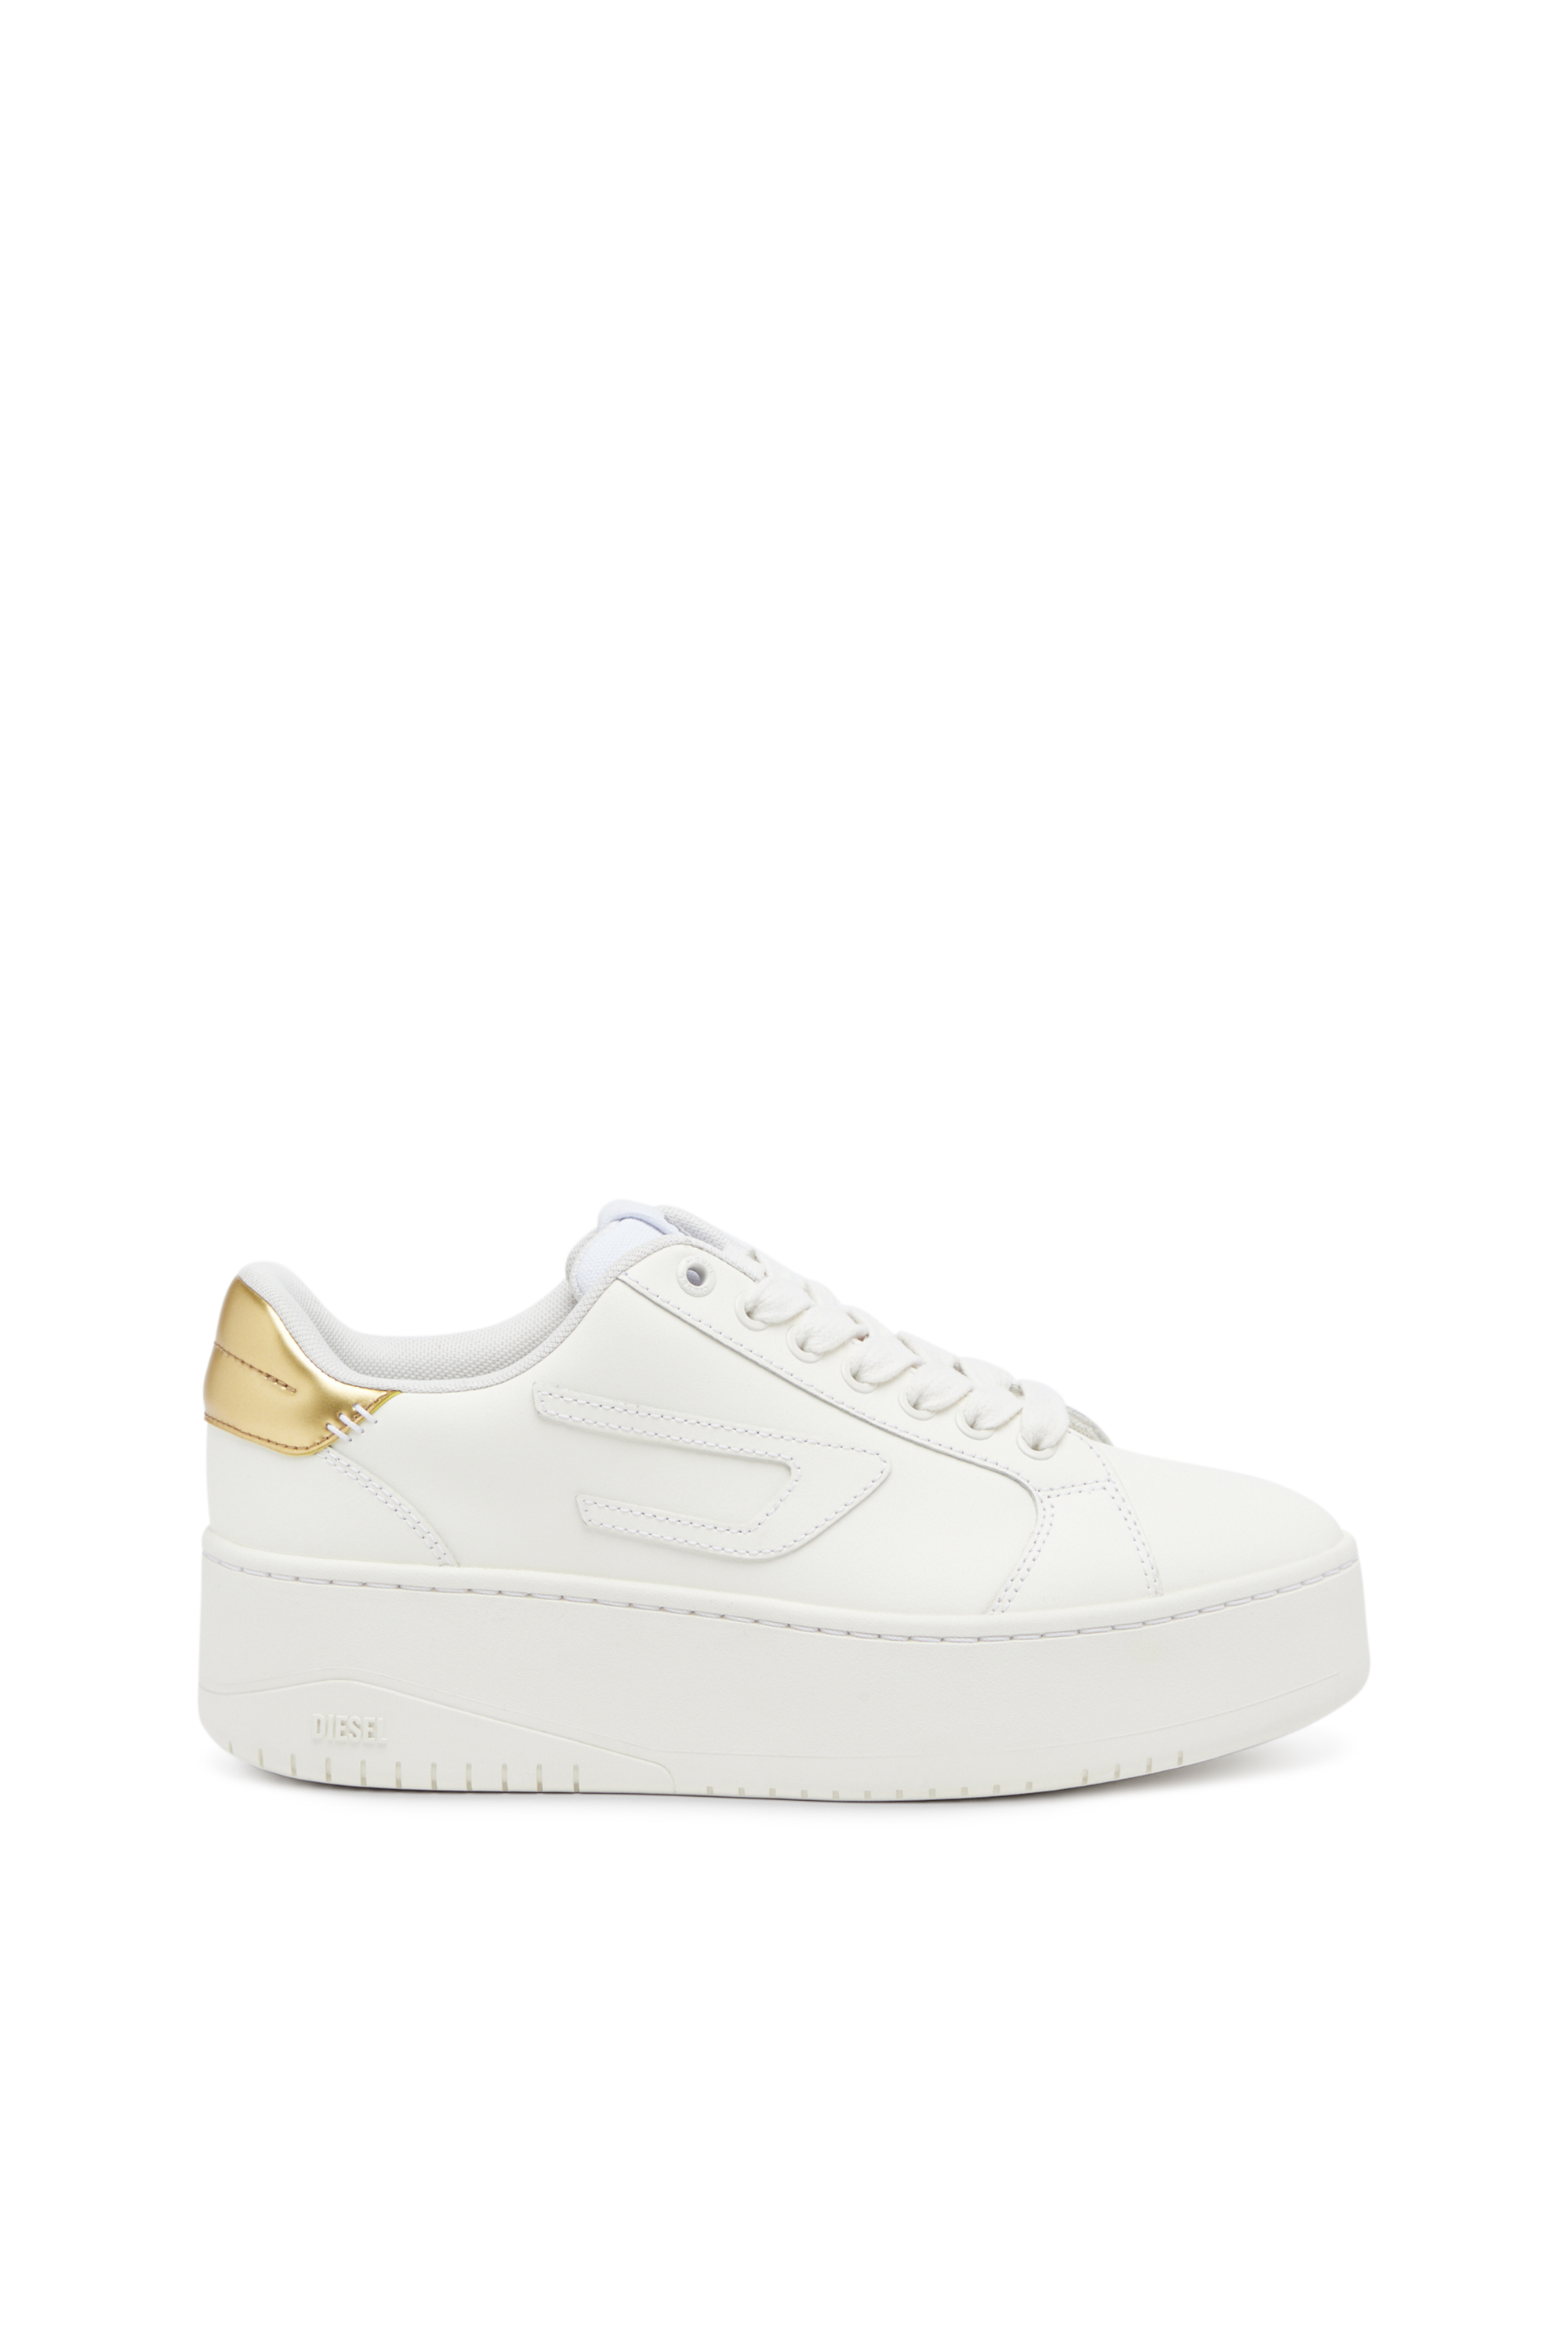 Diesel - S-ATHENE BOLD W, Female S-Athene Bold-Low-top sneakers with flatform sole in Gold - Image 1